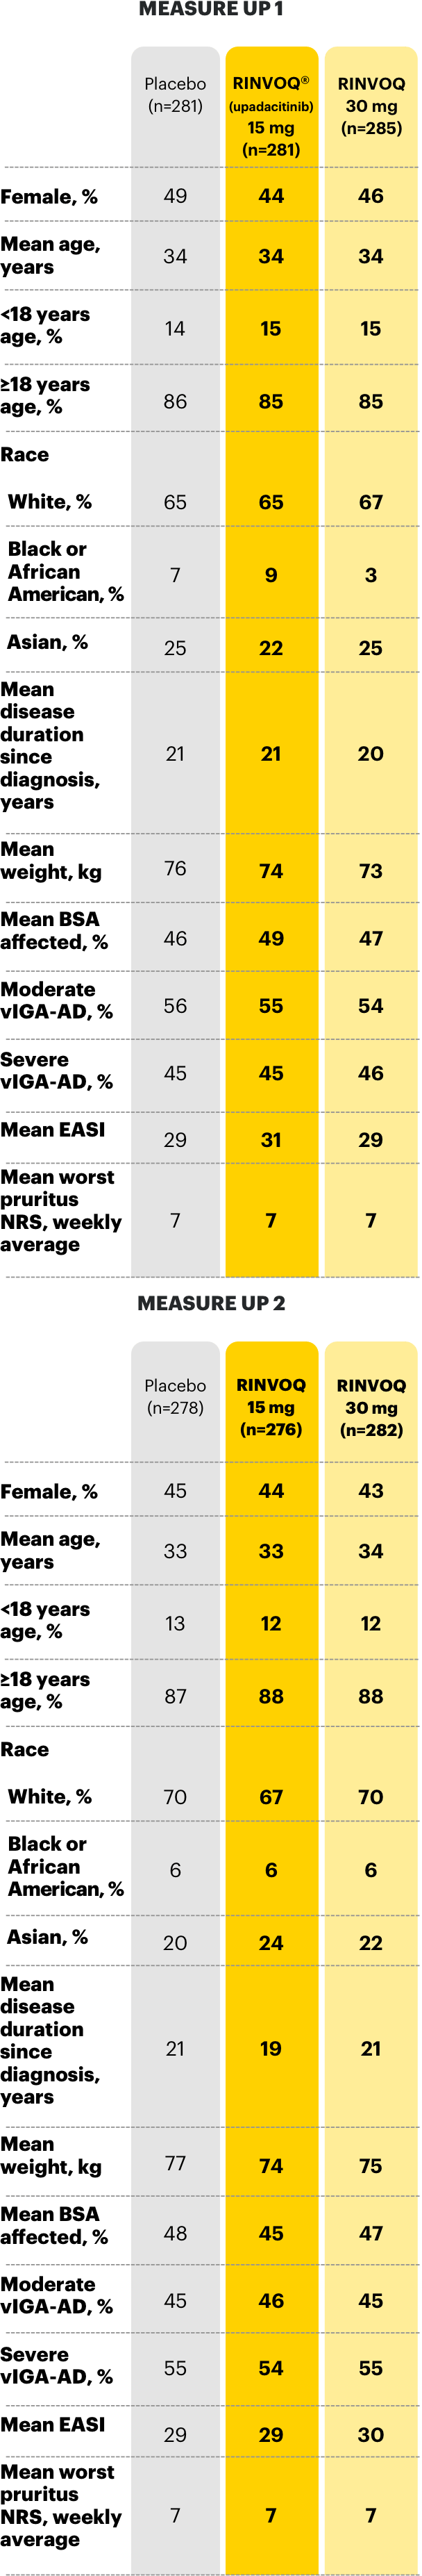 Table outlining the selected baseline characteristics of patients in the worst pruritus NRS 0/1.